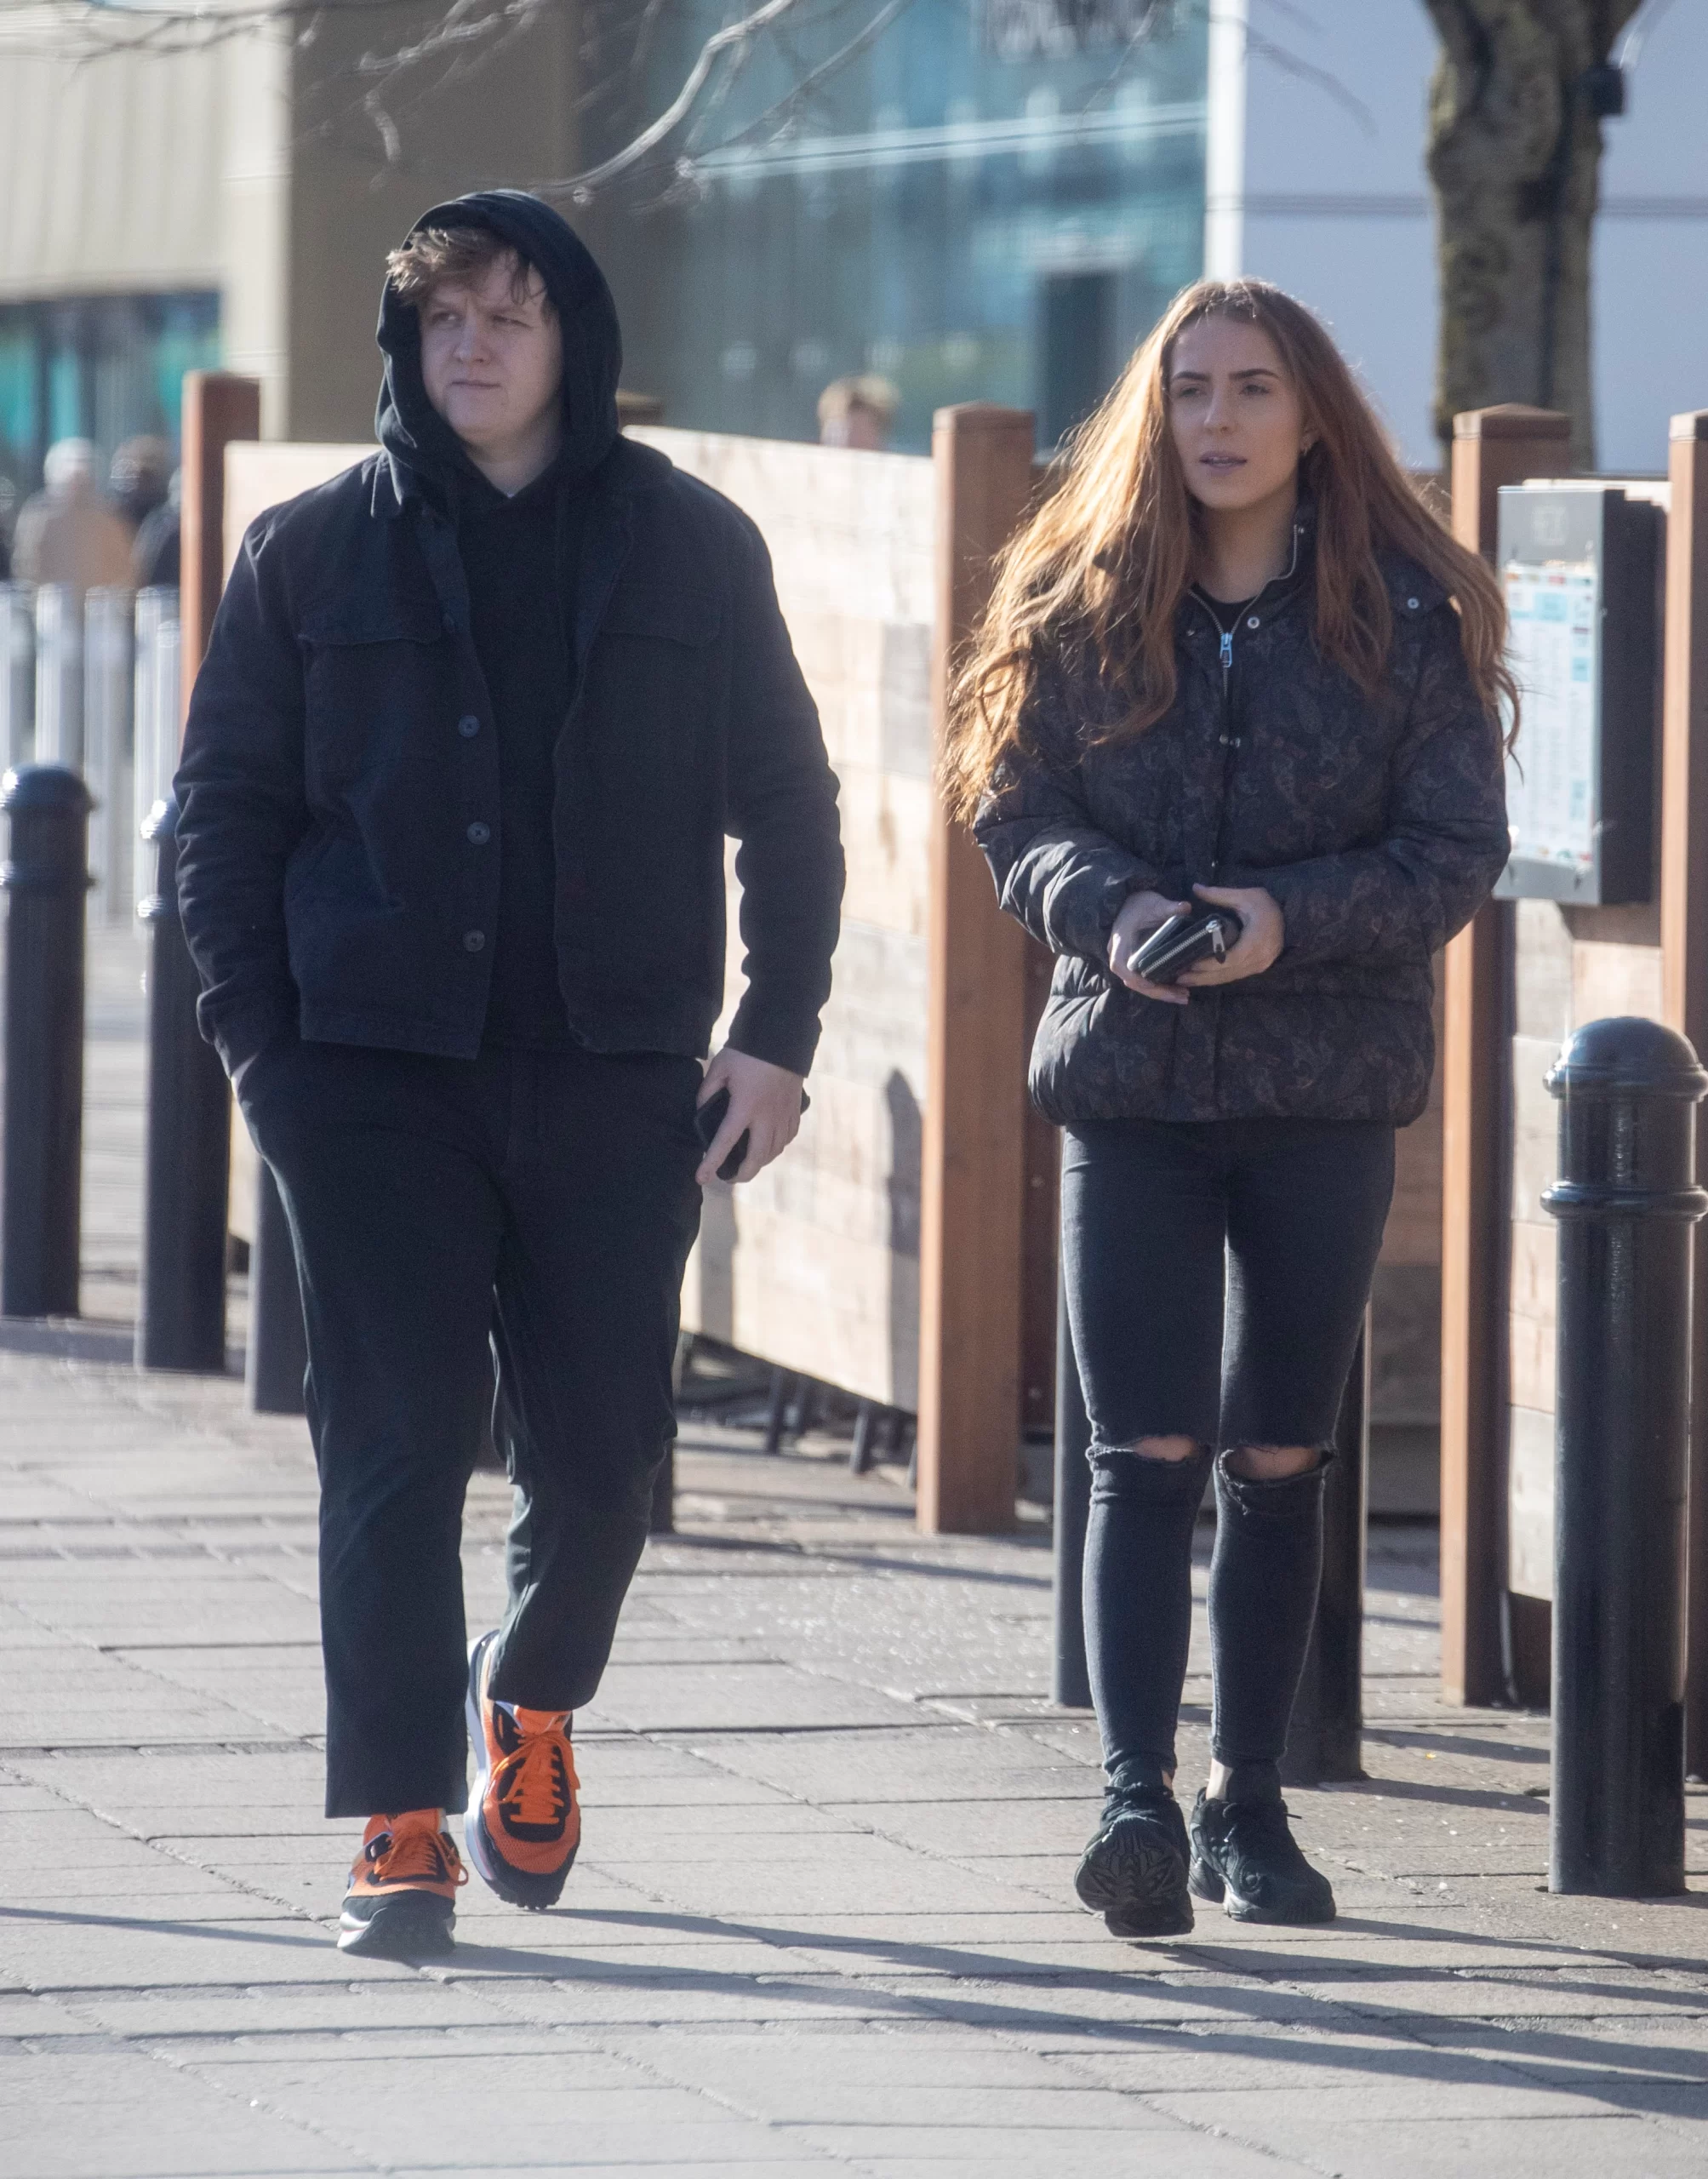 Lewis Capaldi taking a stroll with his ex-girlfriend Catherine Halliday